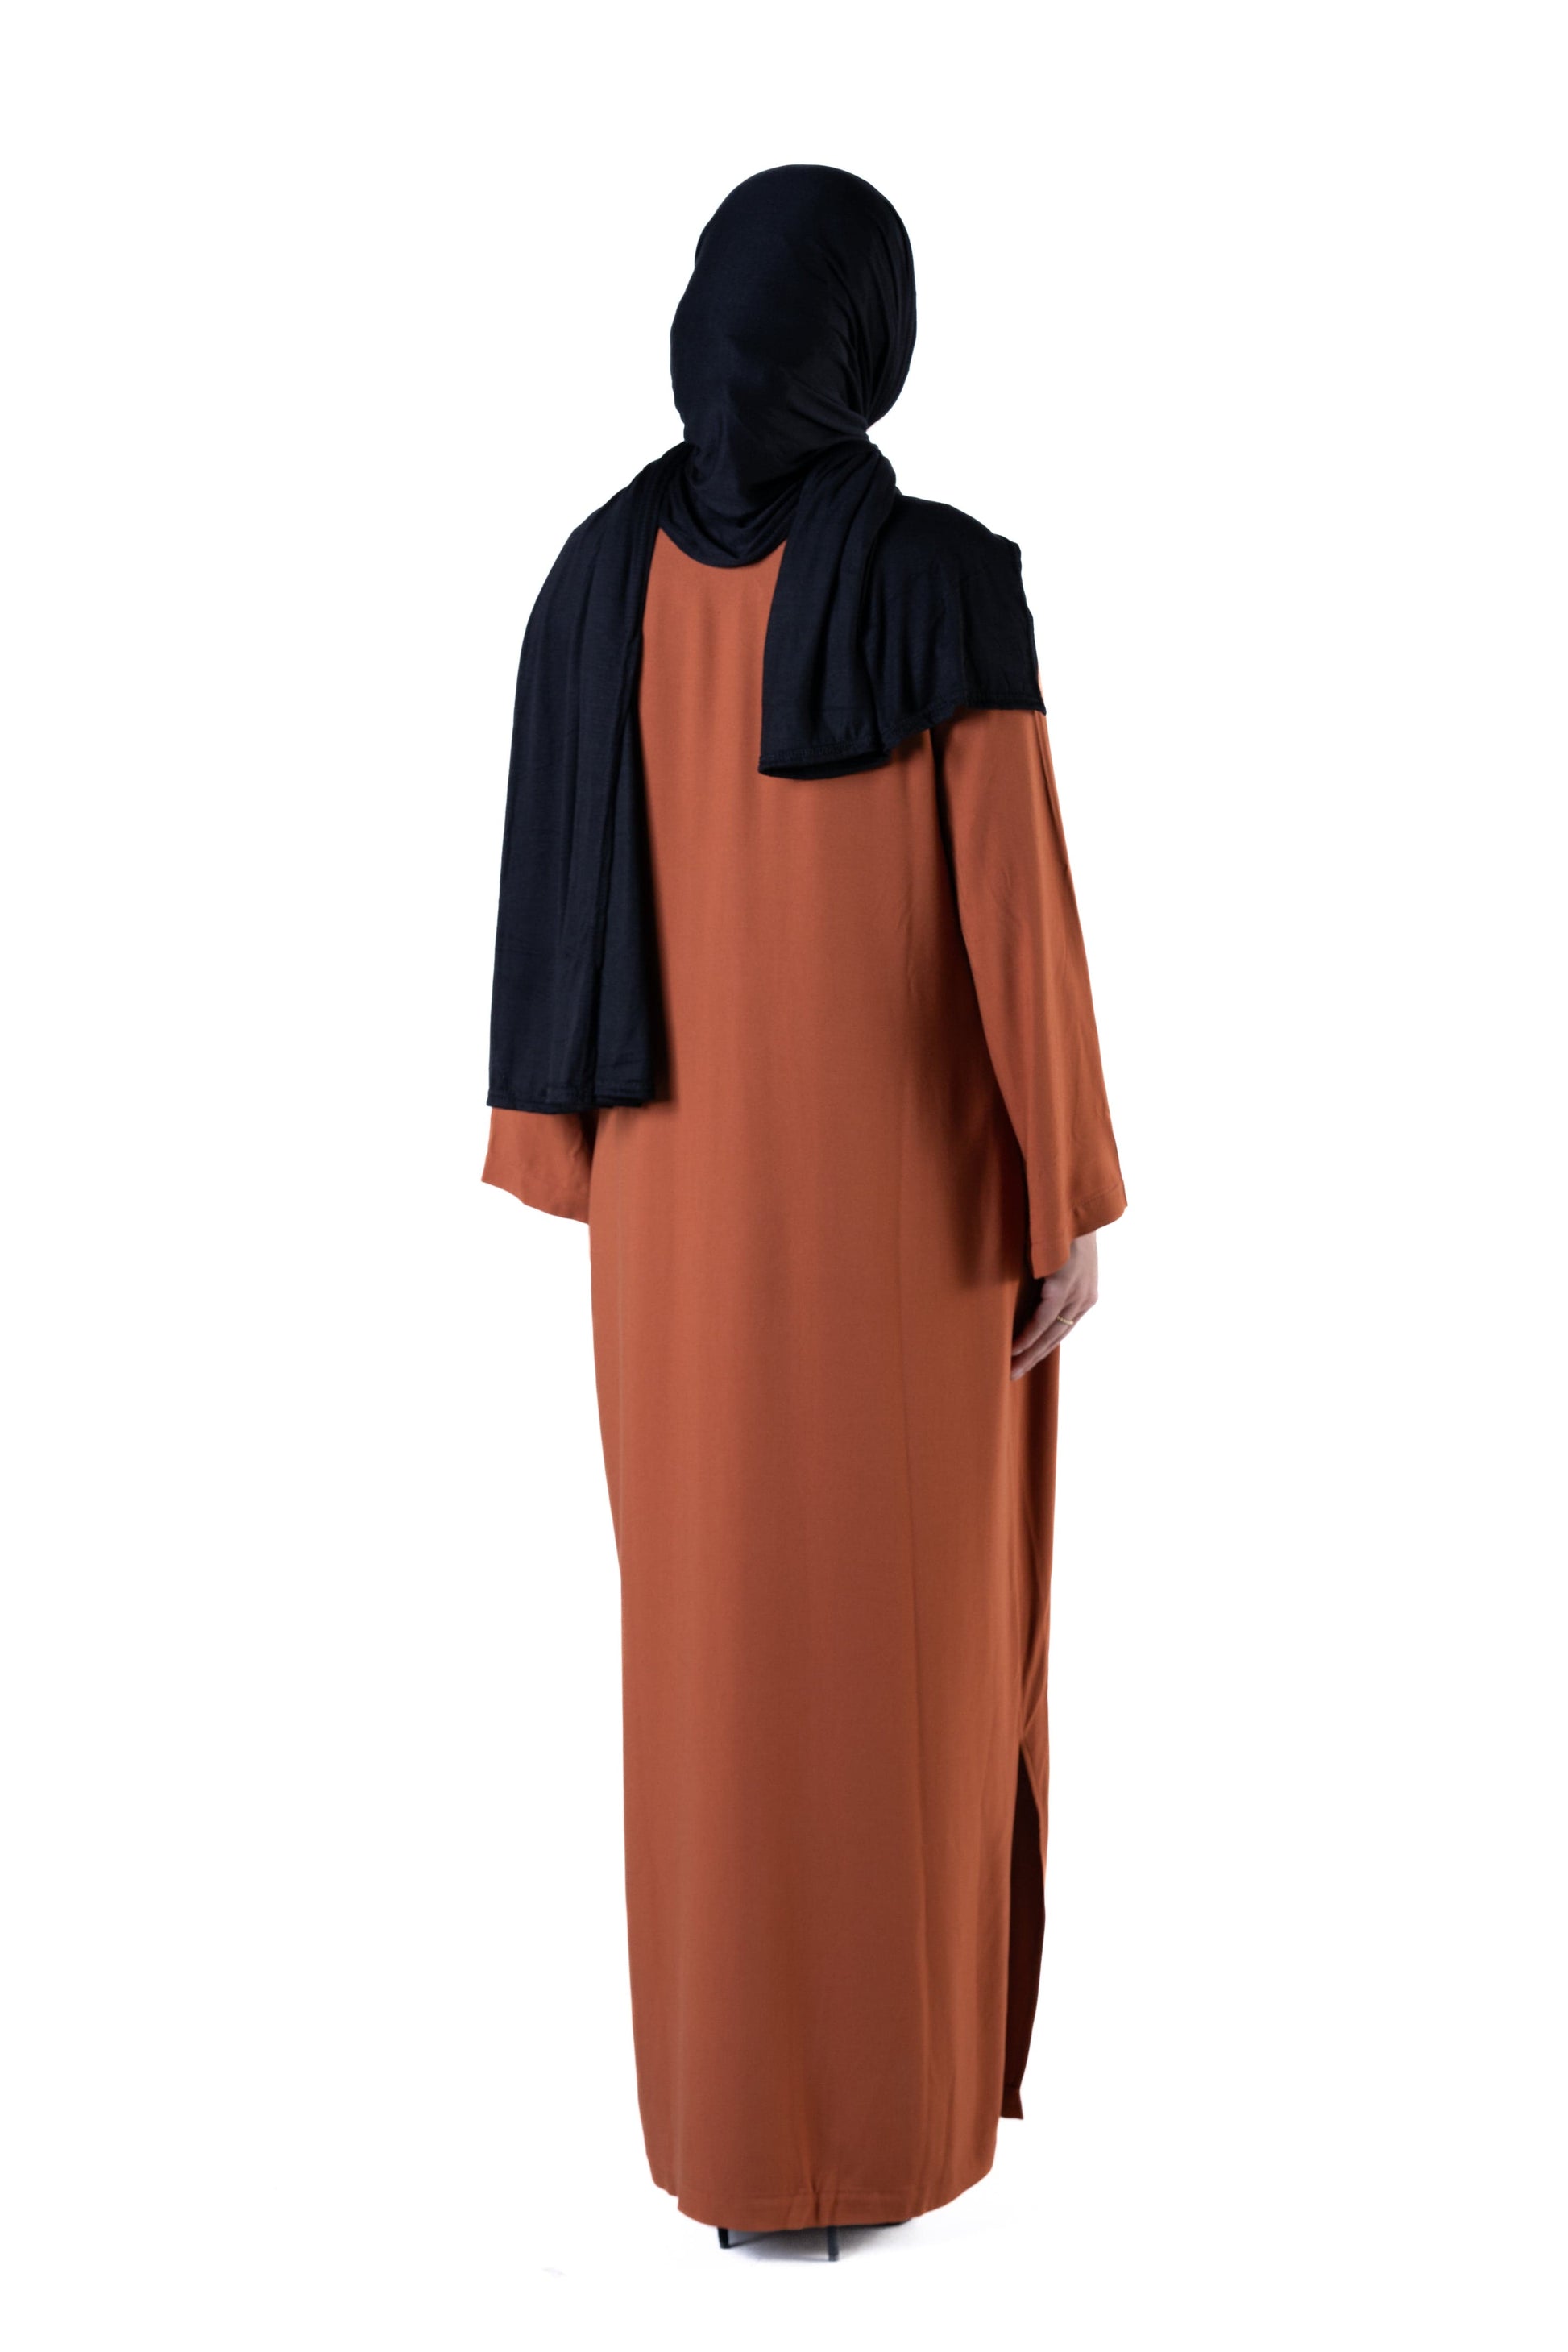 jolienisa Abaya Embrace timeless elegance and effortless comfort with the Jolie Nisa Essential Abaya in a stunning Brick color. Montreal-Made Abaya: The Classic Jolie Nisa Essential Abaya in Brick